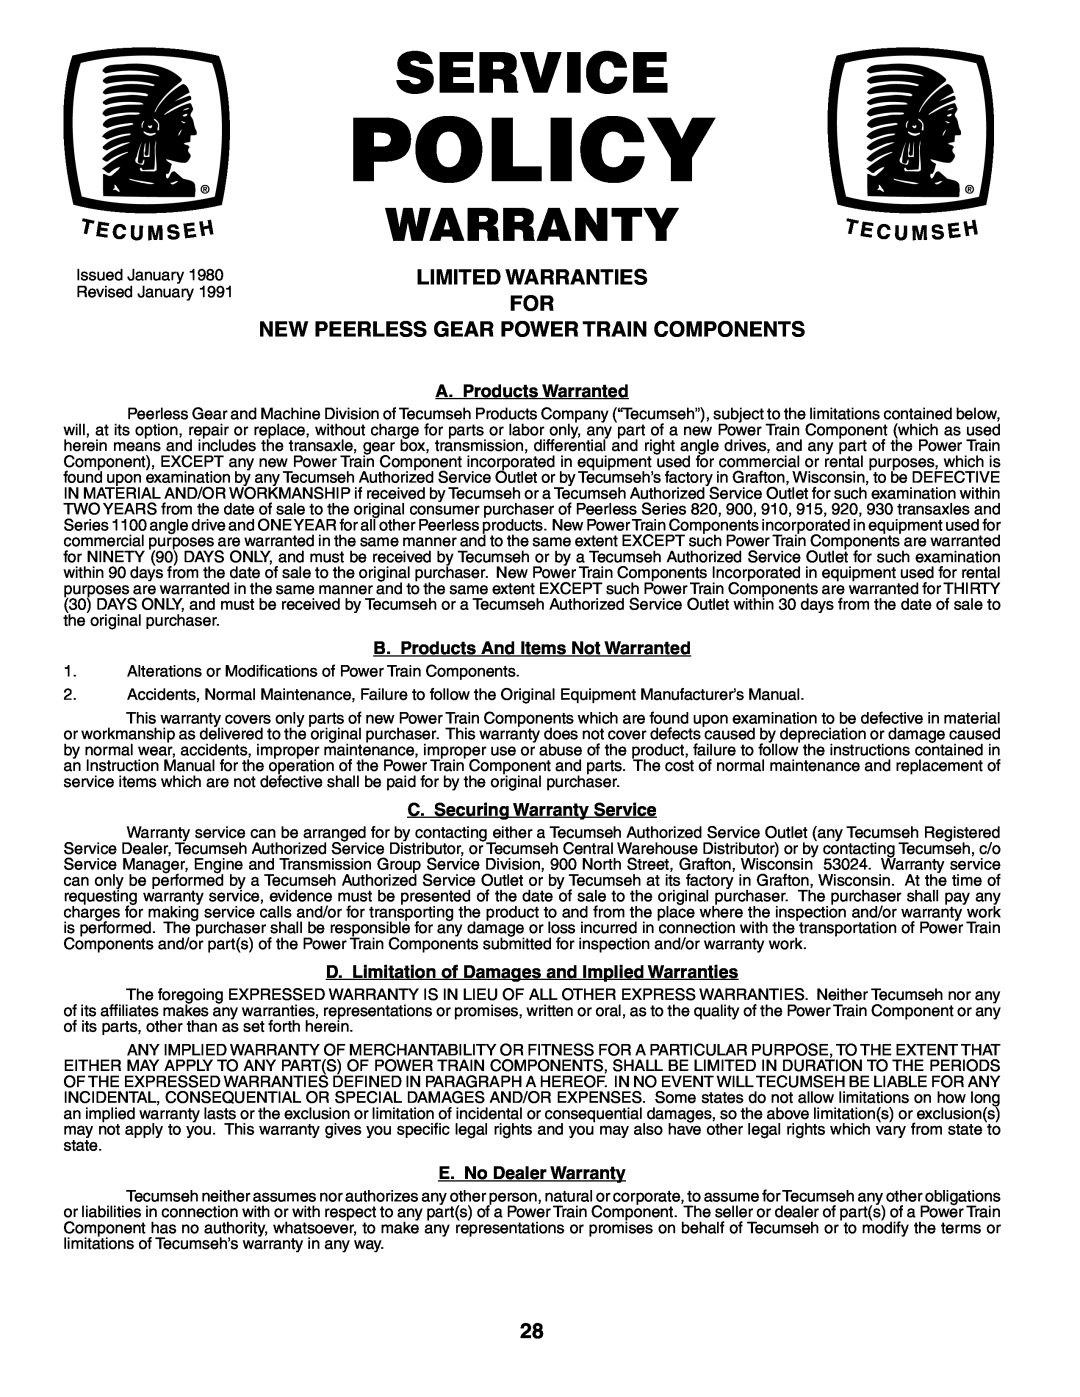 Weed Eater 403284, 96016001400 Limited Warranties For New Peerless Gear Power Train Components, Policy, Service, Warranty 